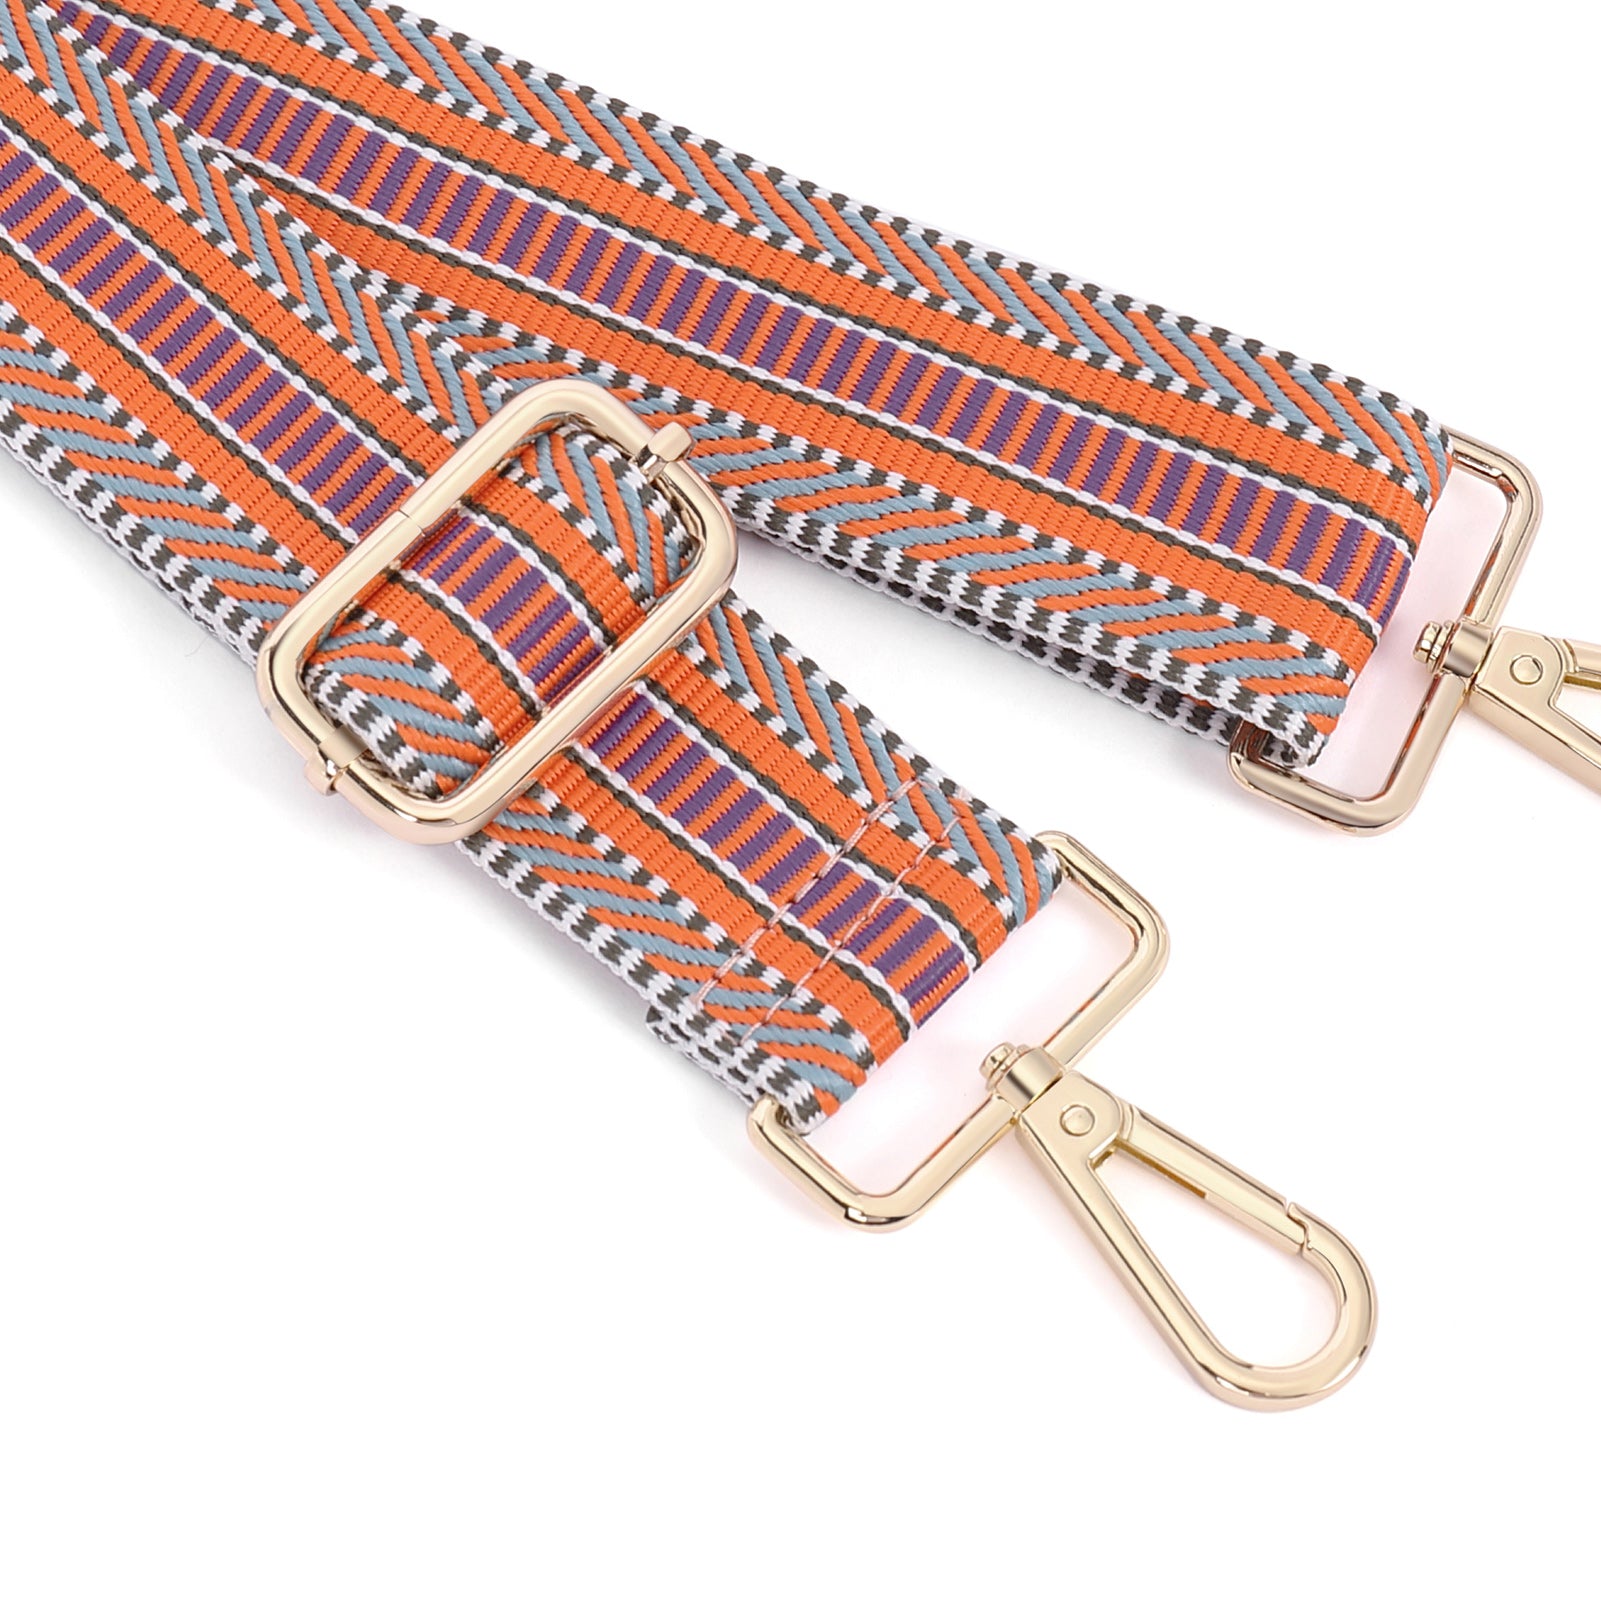 Replacement Purse Strap,Wide Adjustable Crossbody Straps for Handbags